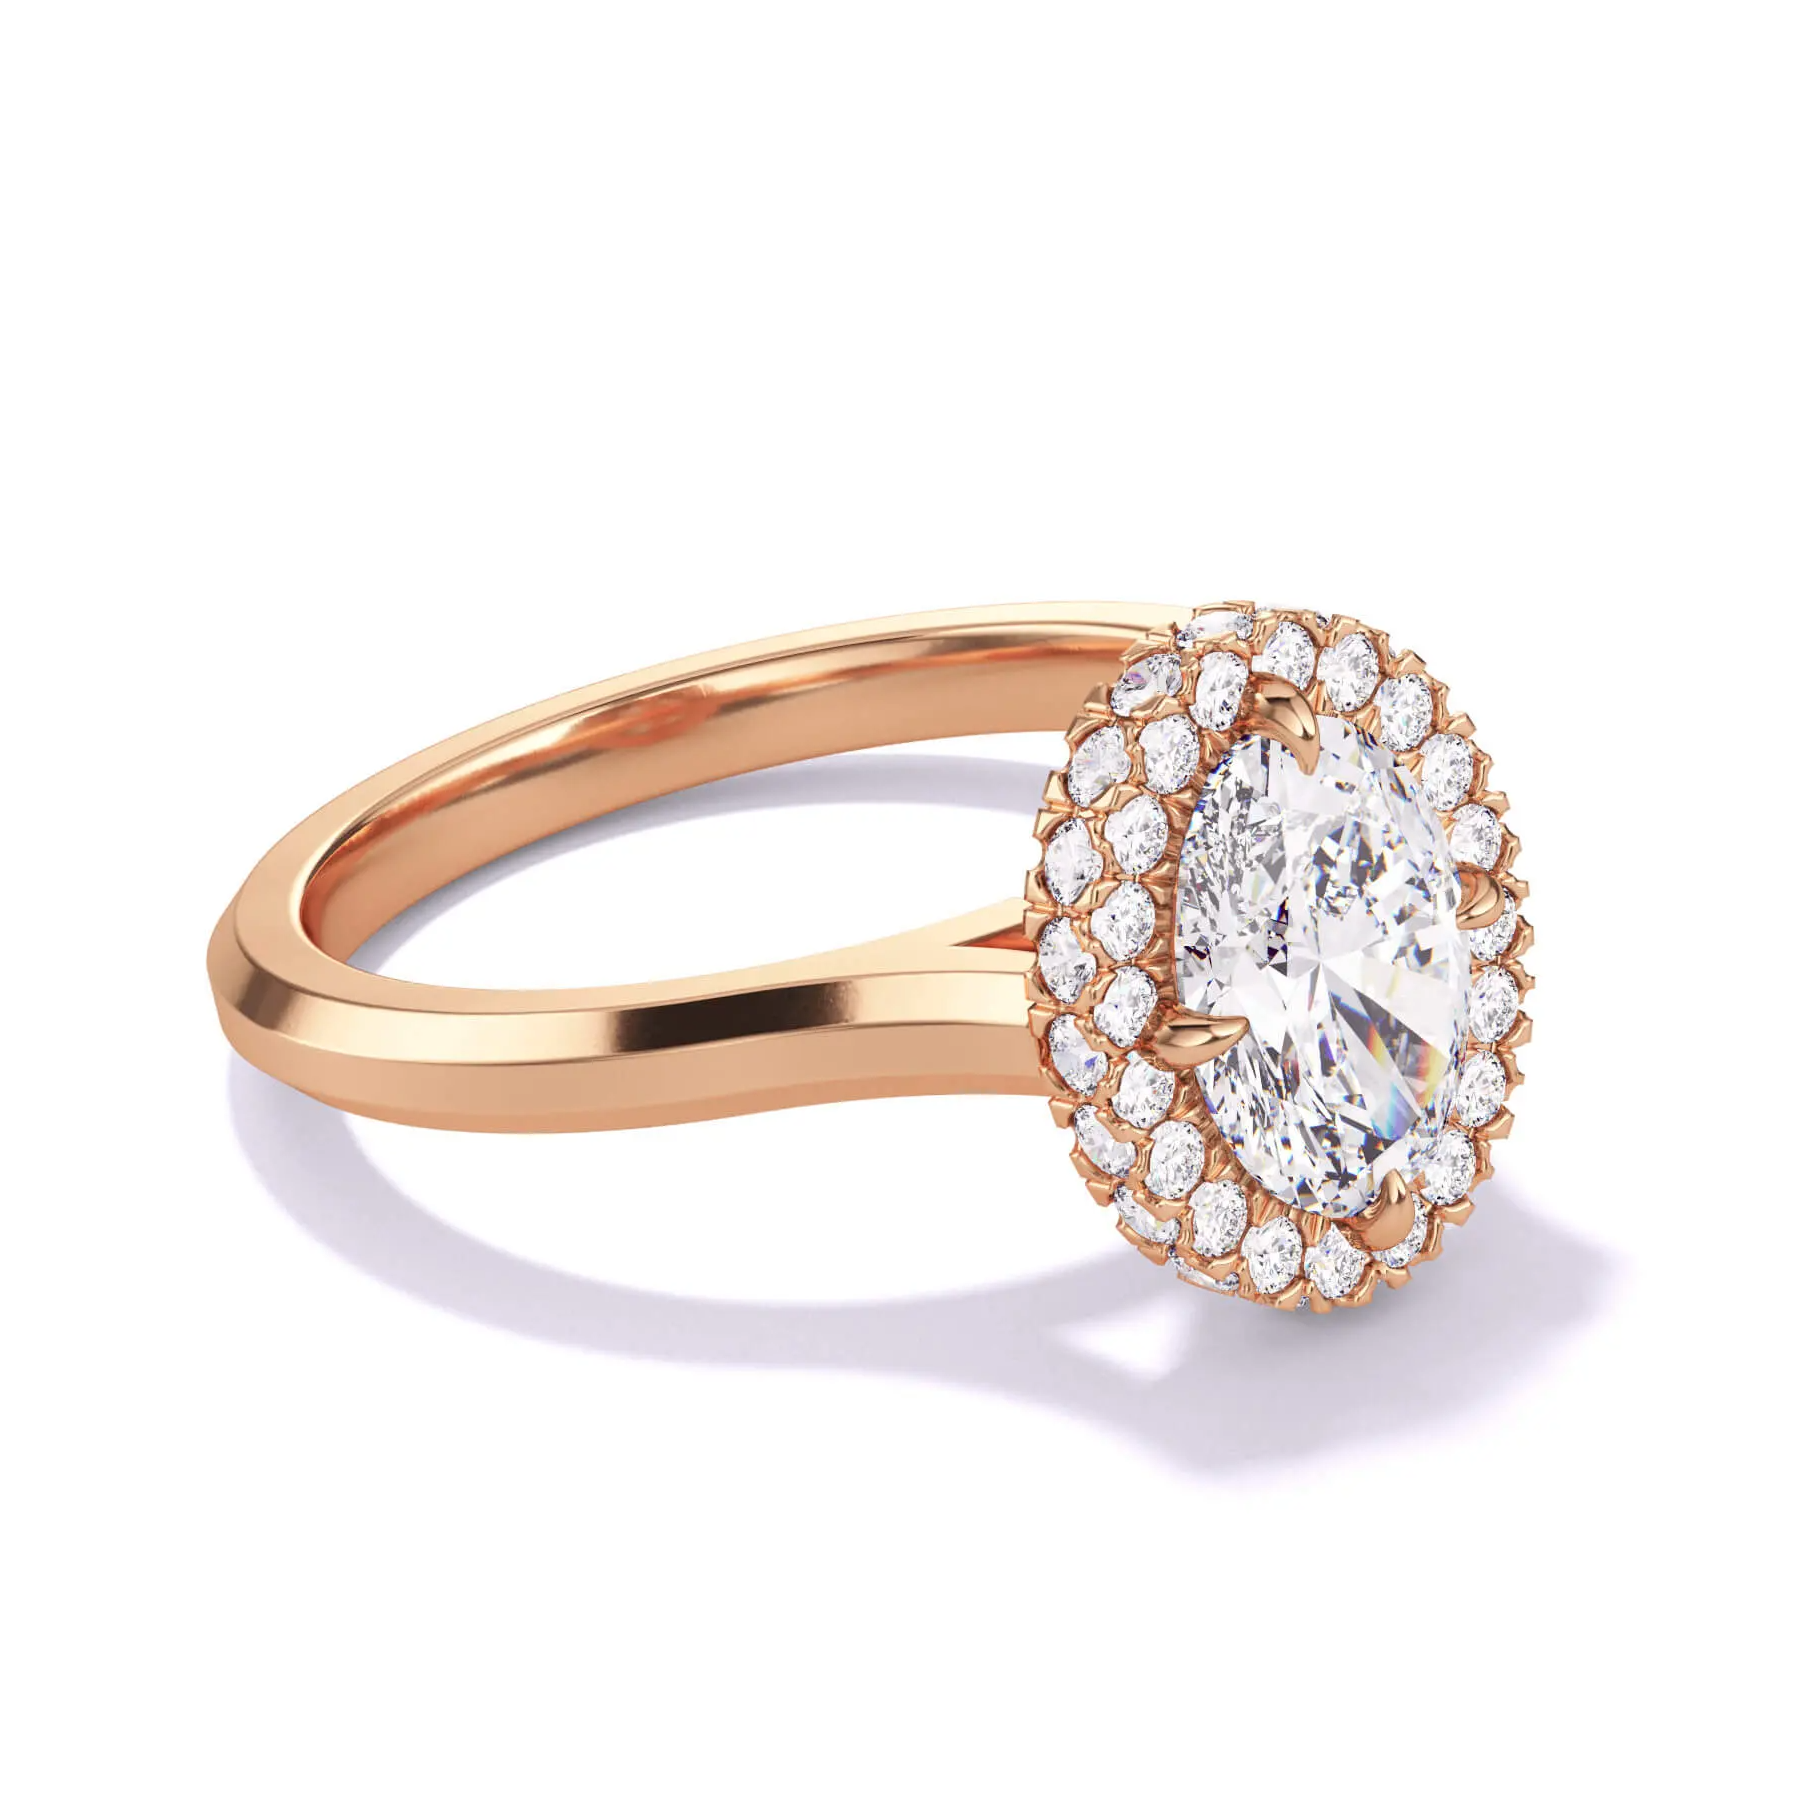 $10,000 diamond engagement ring  - oval with wrapped halo in rose gold